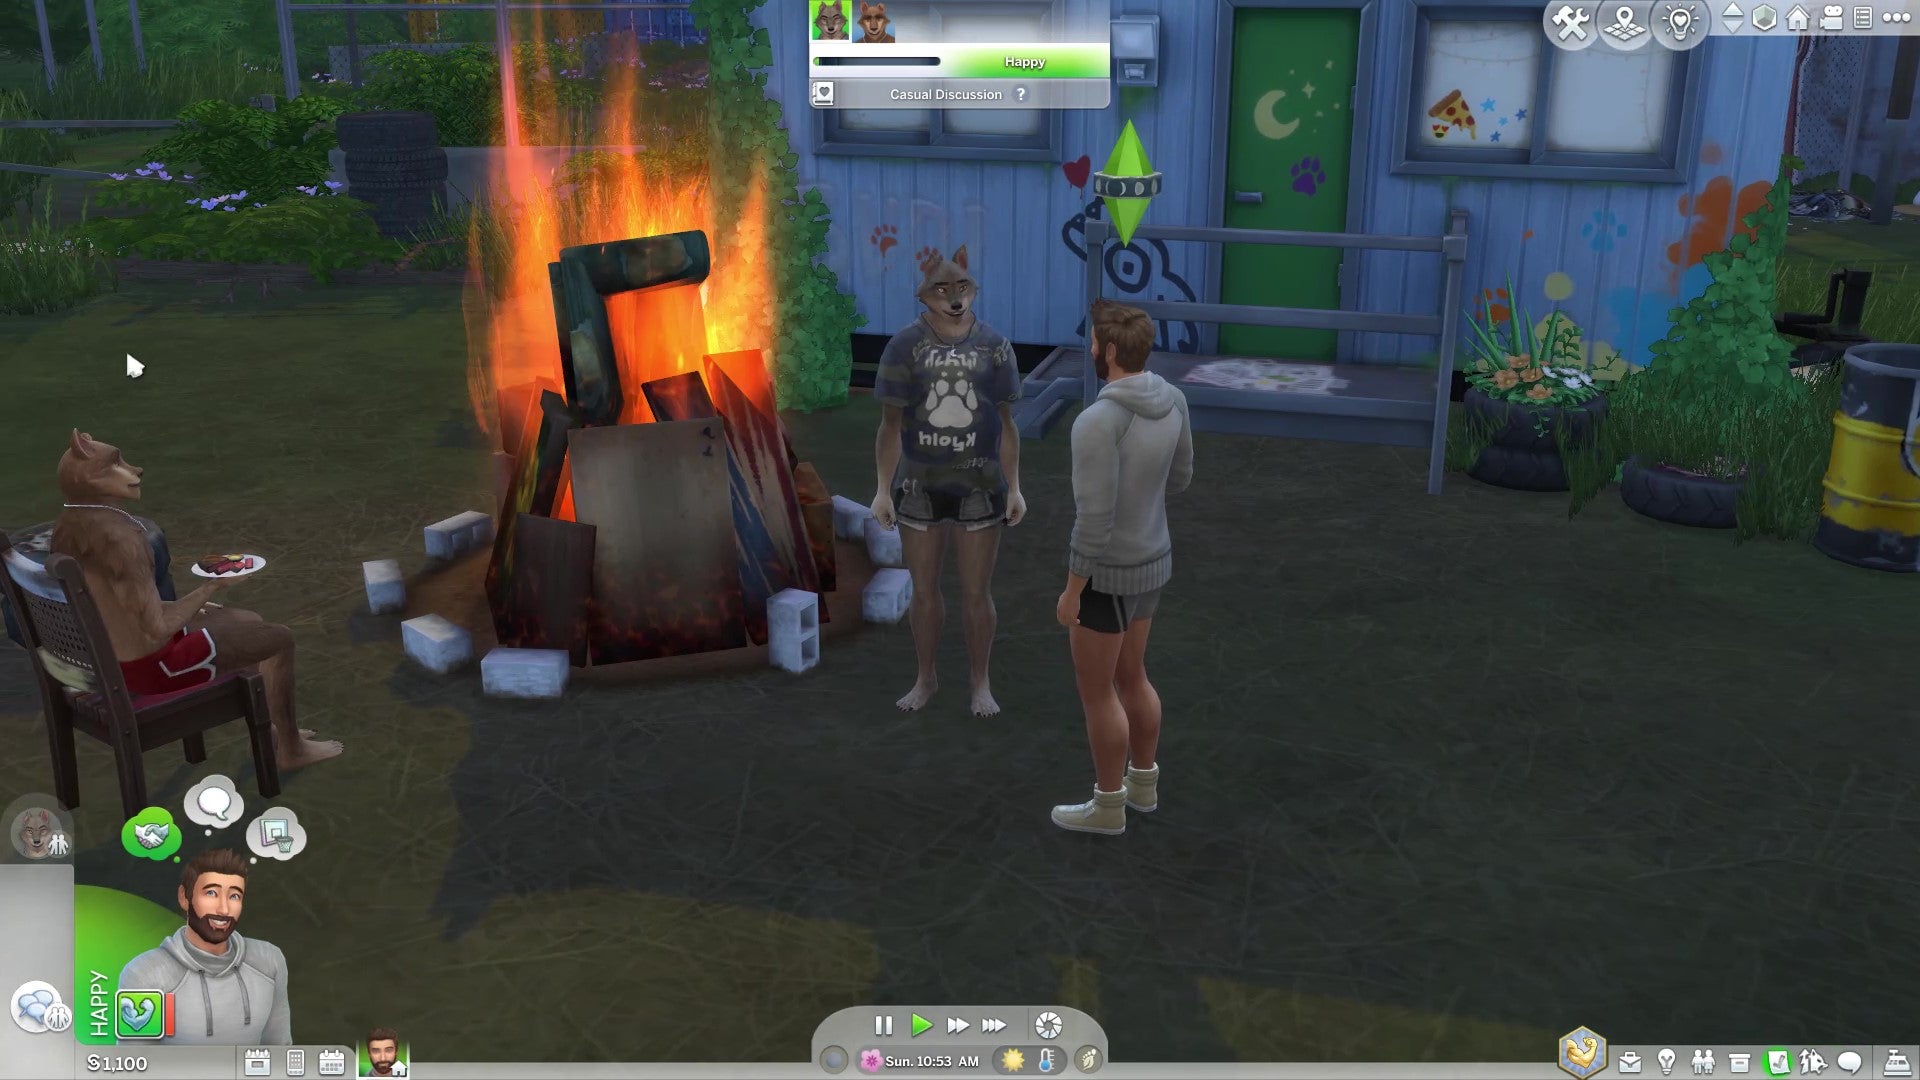 Three werewolf Sims, two of them in Beast Form, chat outside the Wildfangs' clubhouse in The Sims 4.